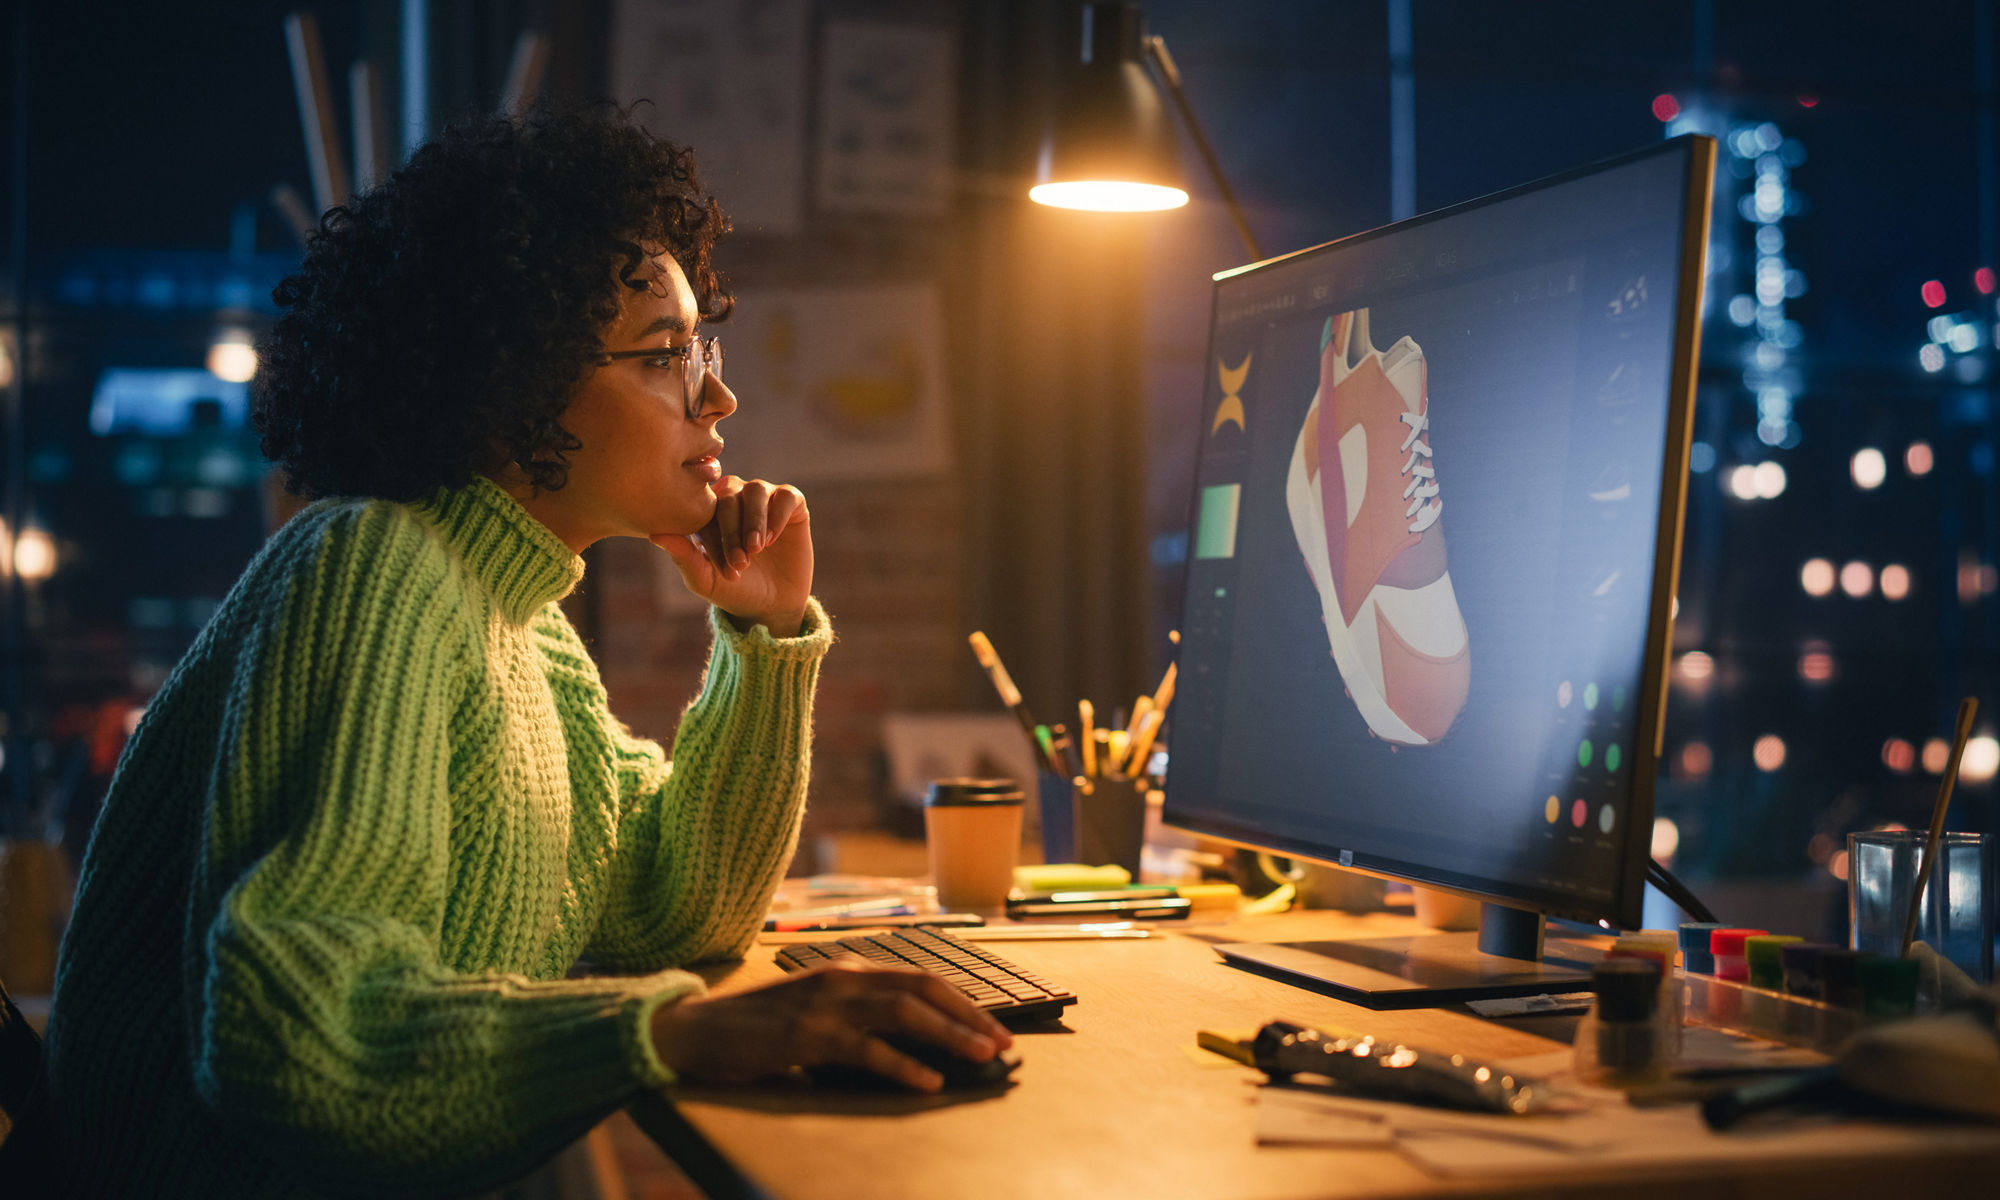 Woman in green sweater in front of monitor